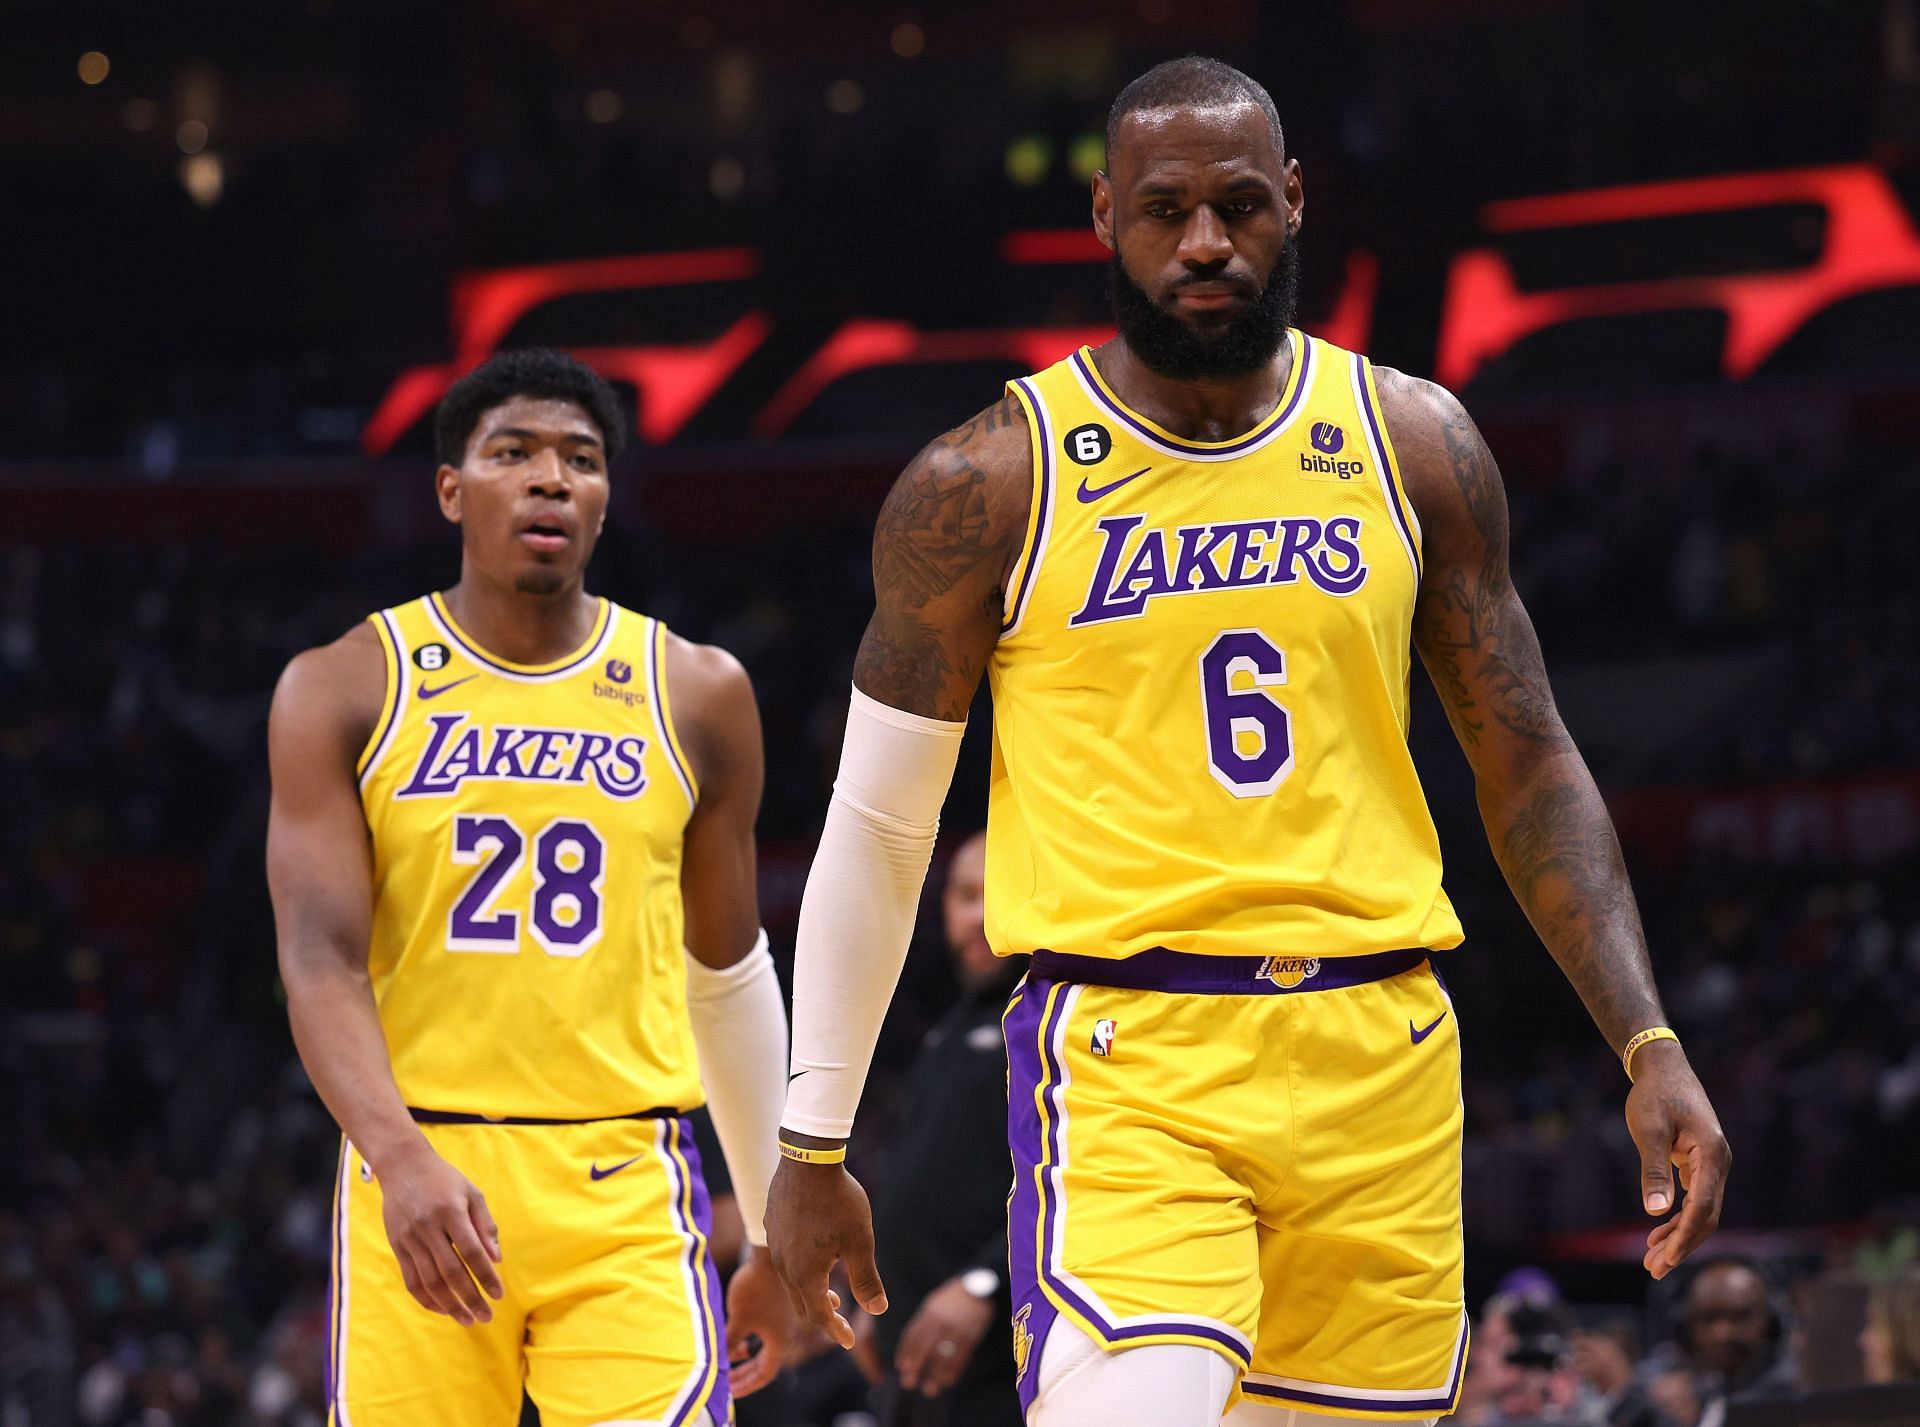 Lakers Practice ! LeBron James & Rui Hachimura are the last 2 in the gym  working 